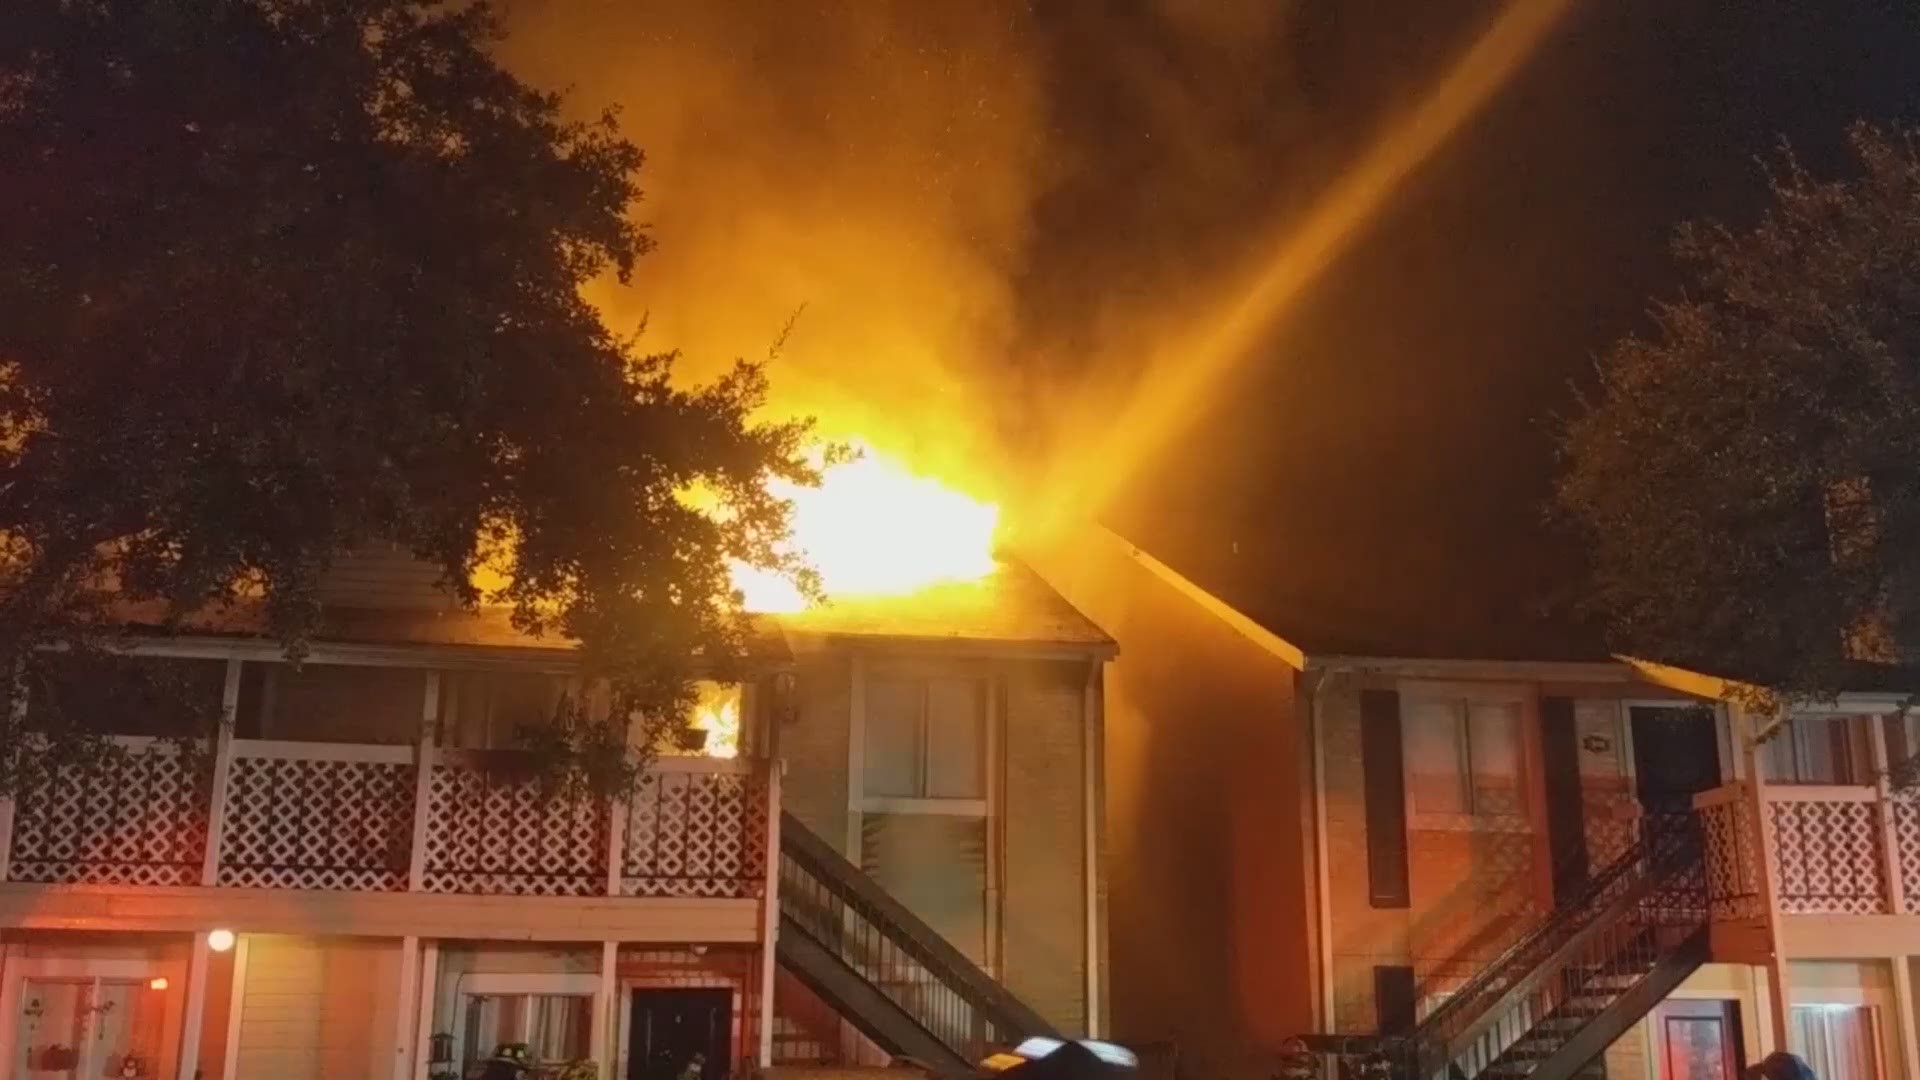 About 12 units were damaged at a north Harris County apartment complex after a 2-alarm fire.